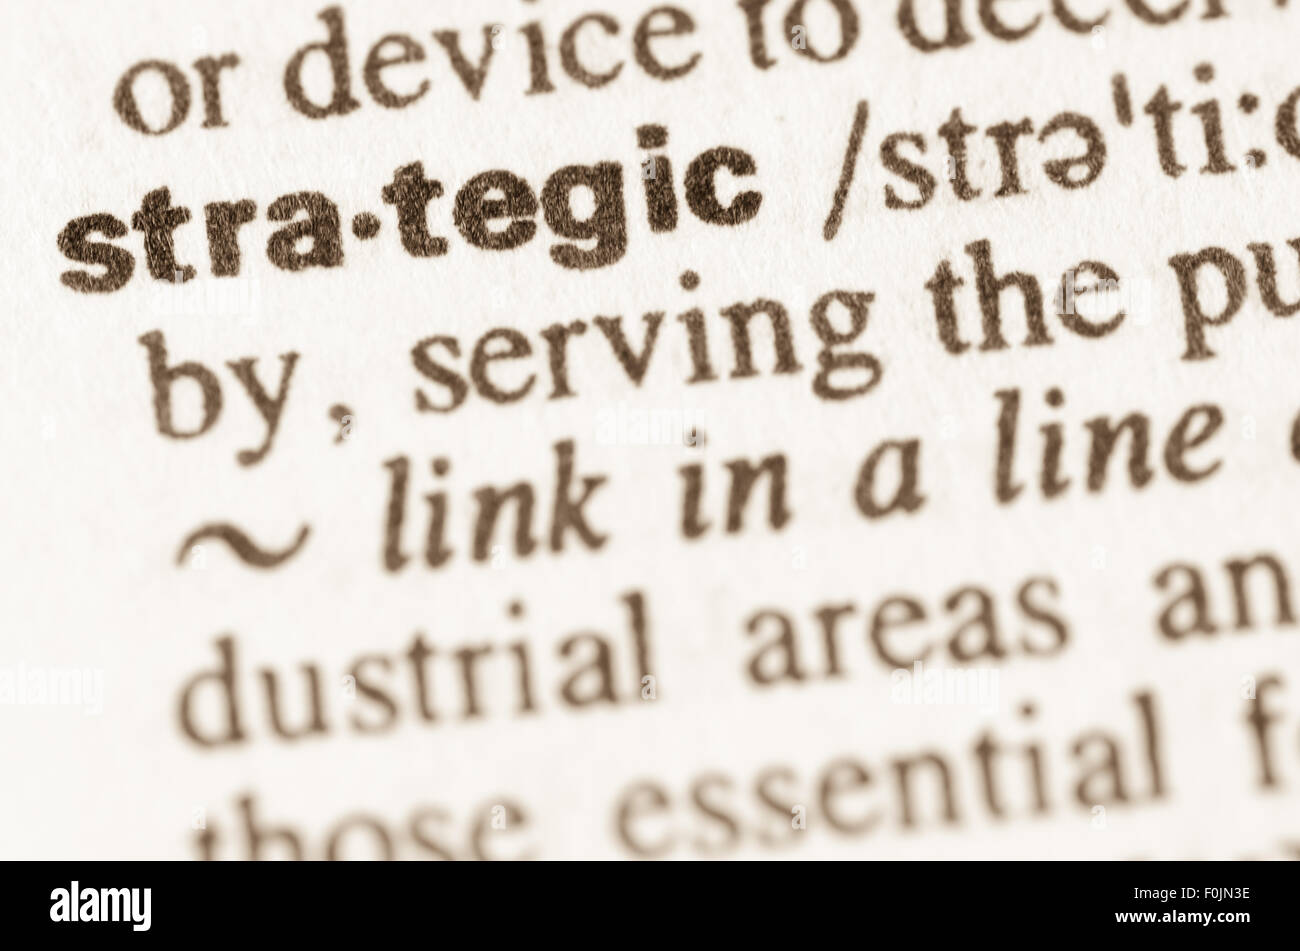 Definition of word strategic in dictionary Stock Photo